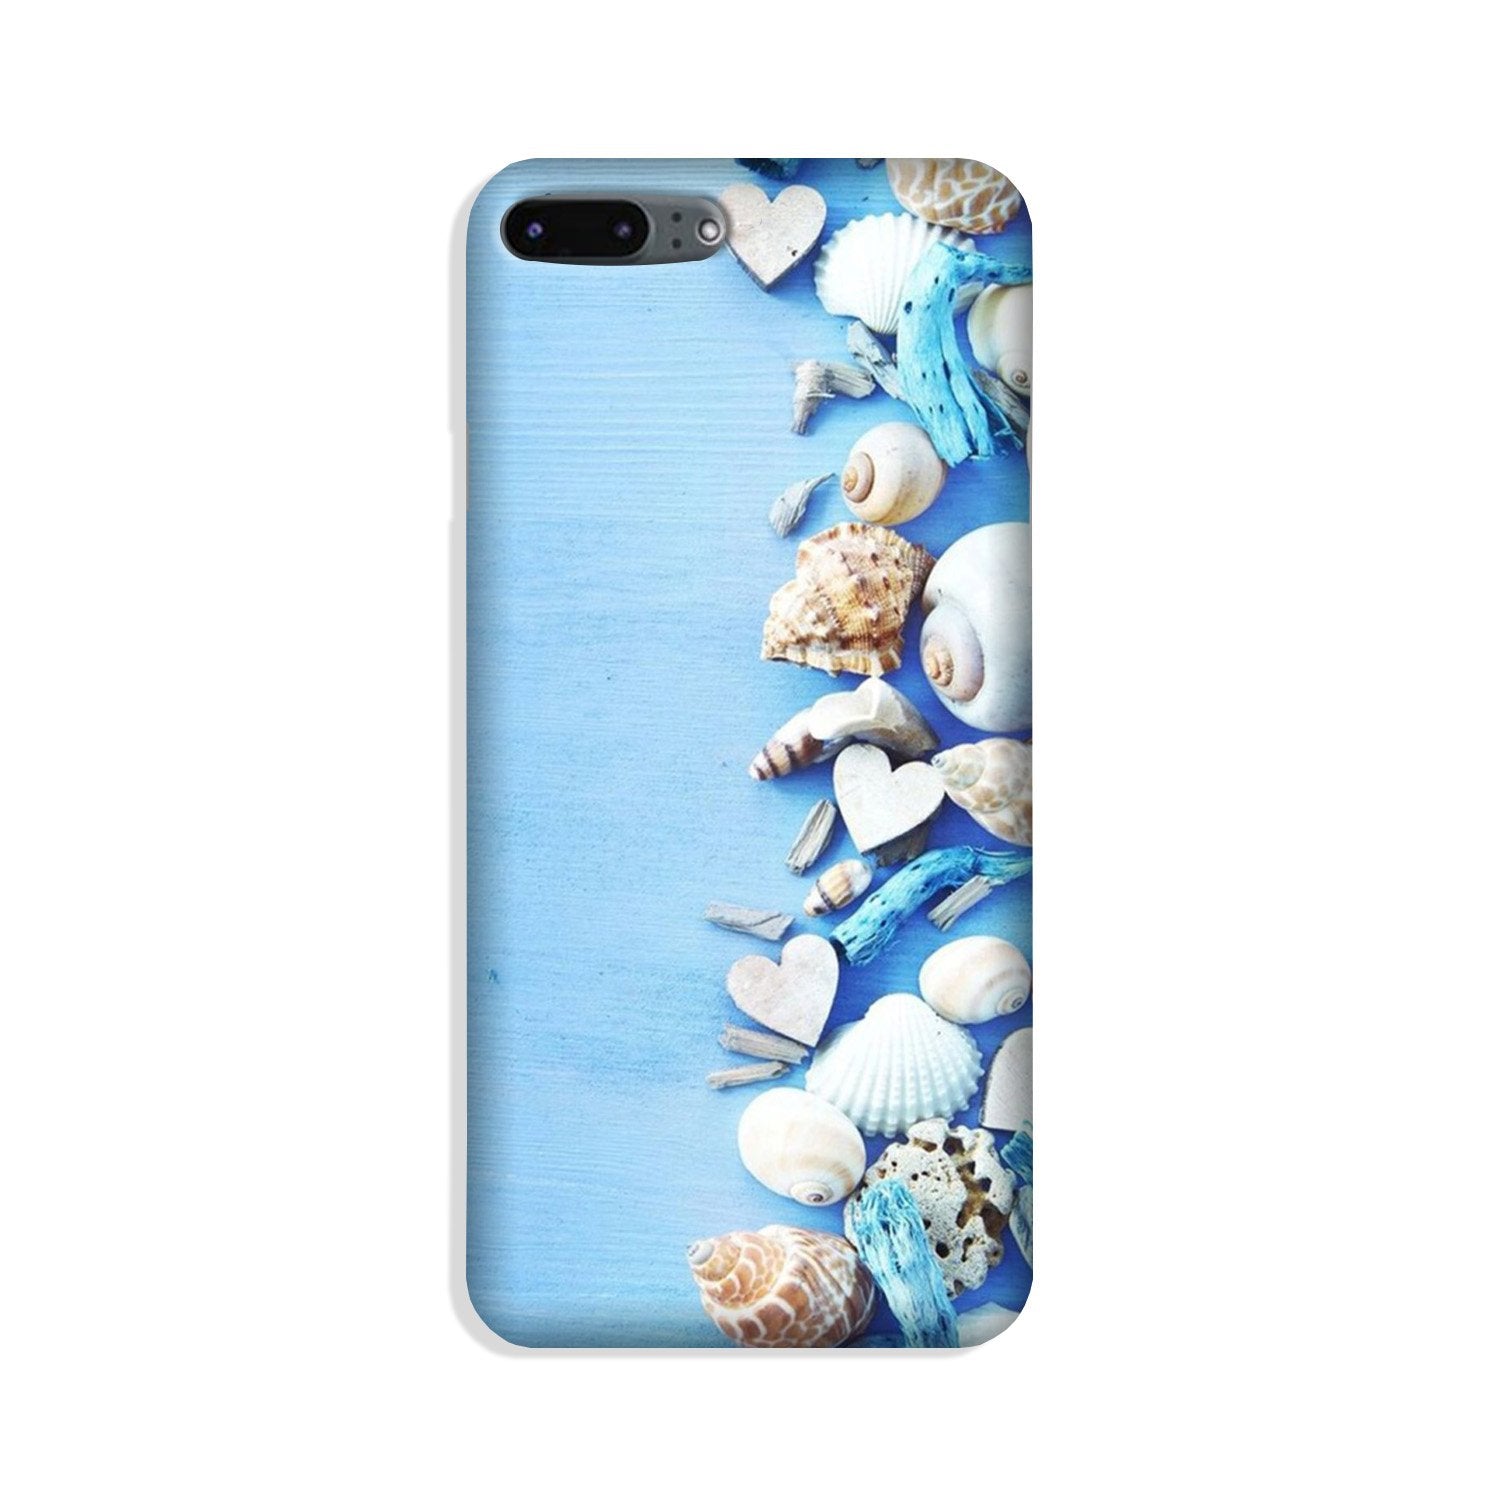 Sea Shells2 Case for iPhone 8 Plus